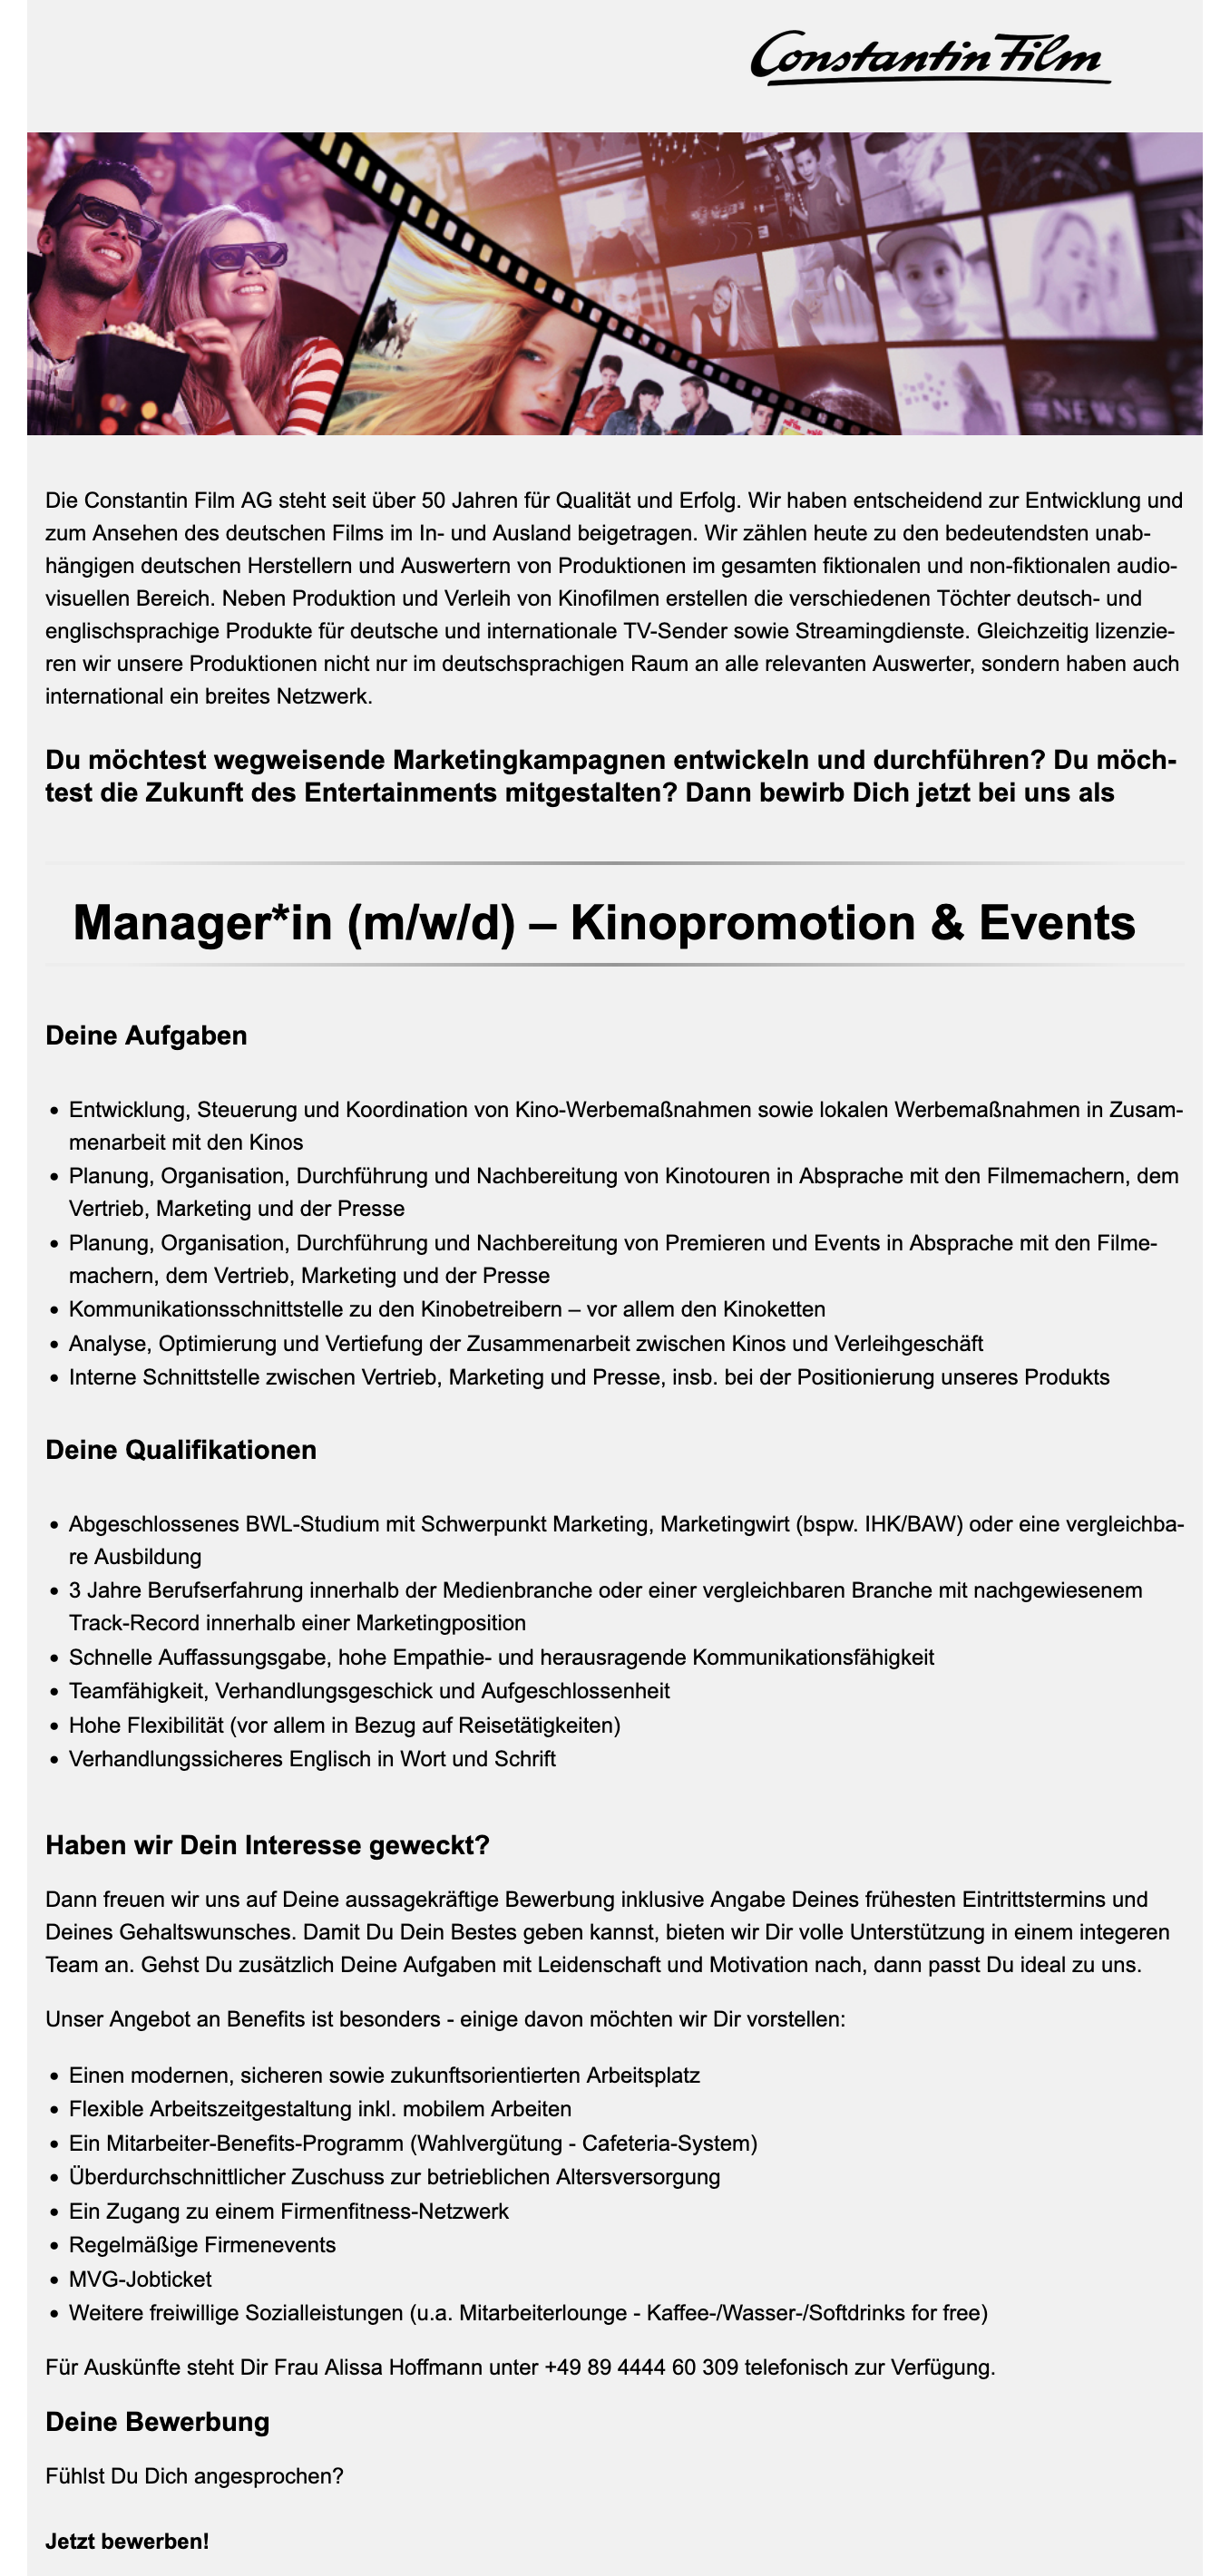 Manager*in (m/w/d) - Kinopromotion & Events